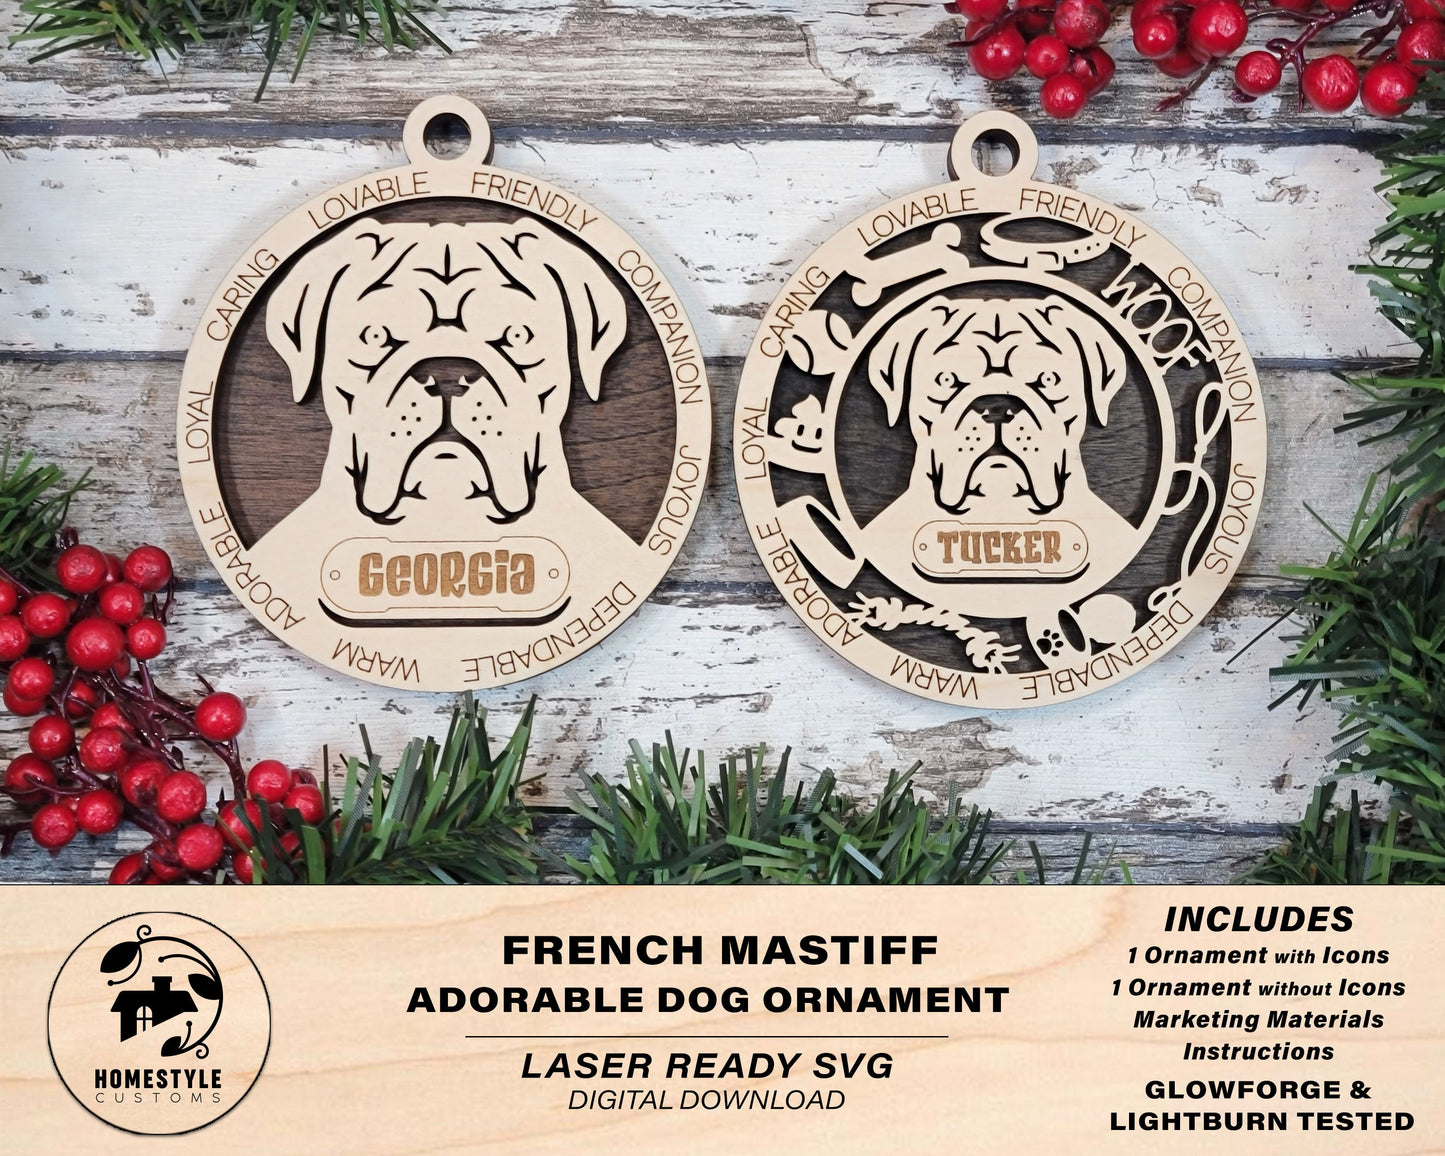 French Mastiff - Adorable Dog Ornaments - 2 Ornaments included - SVG, PDF, AI File Download - Sized for Glowforge